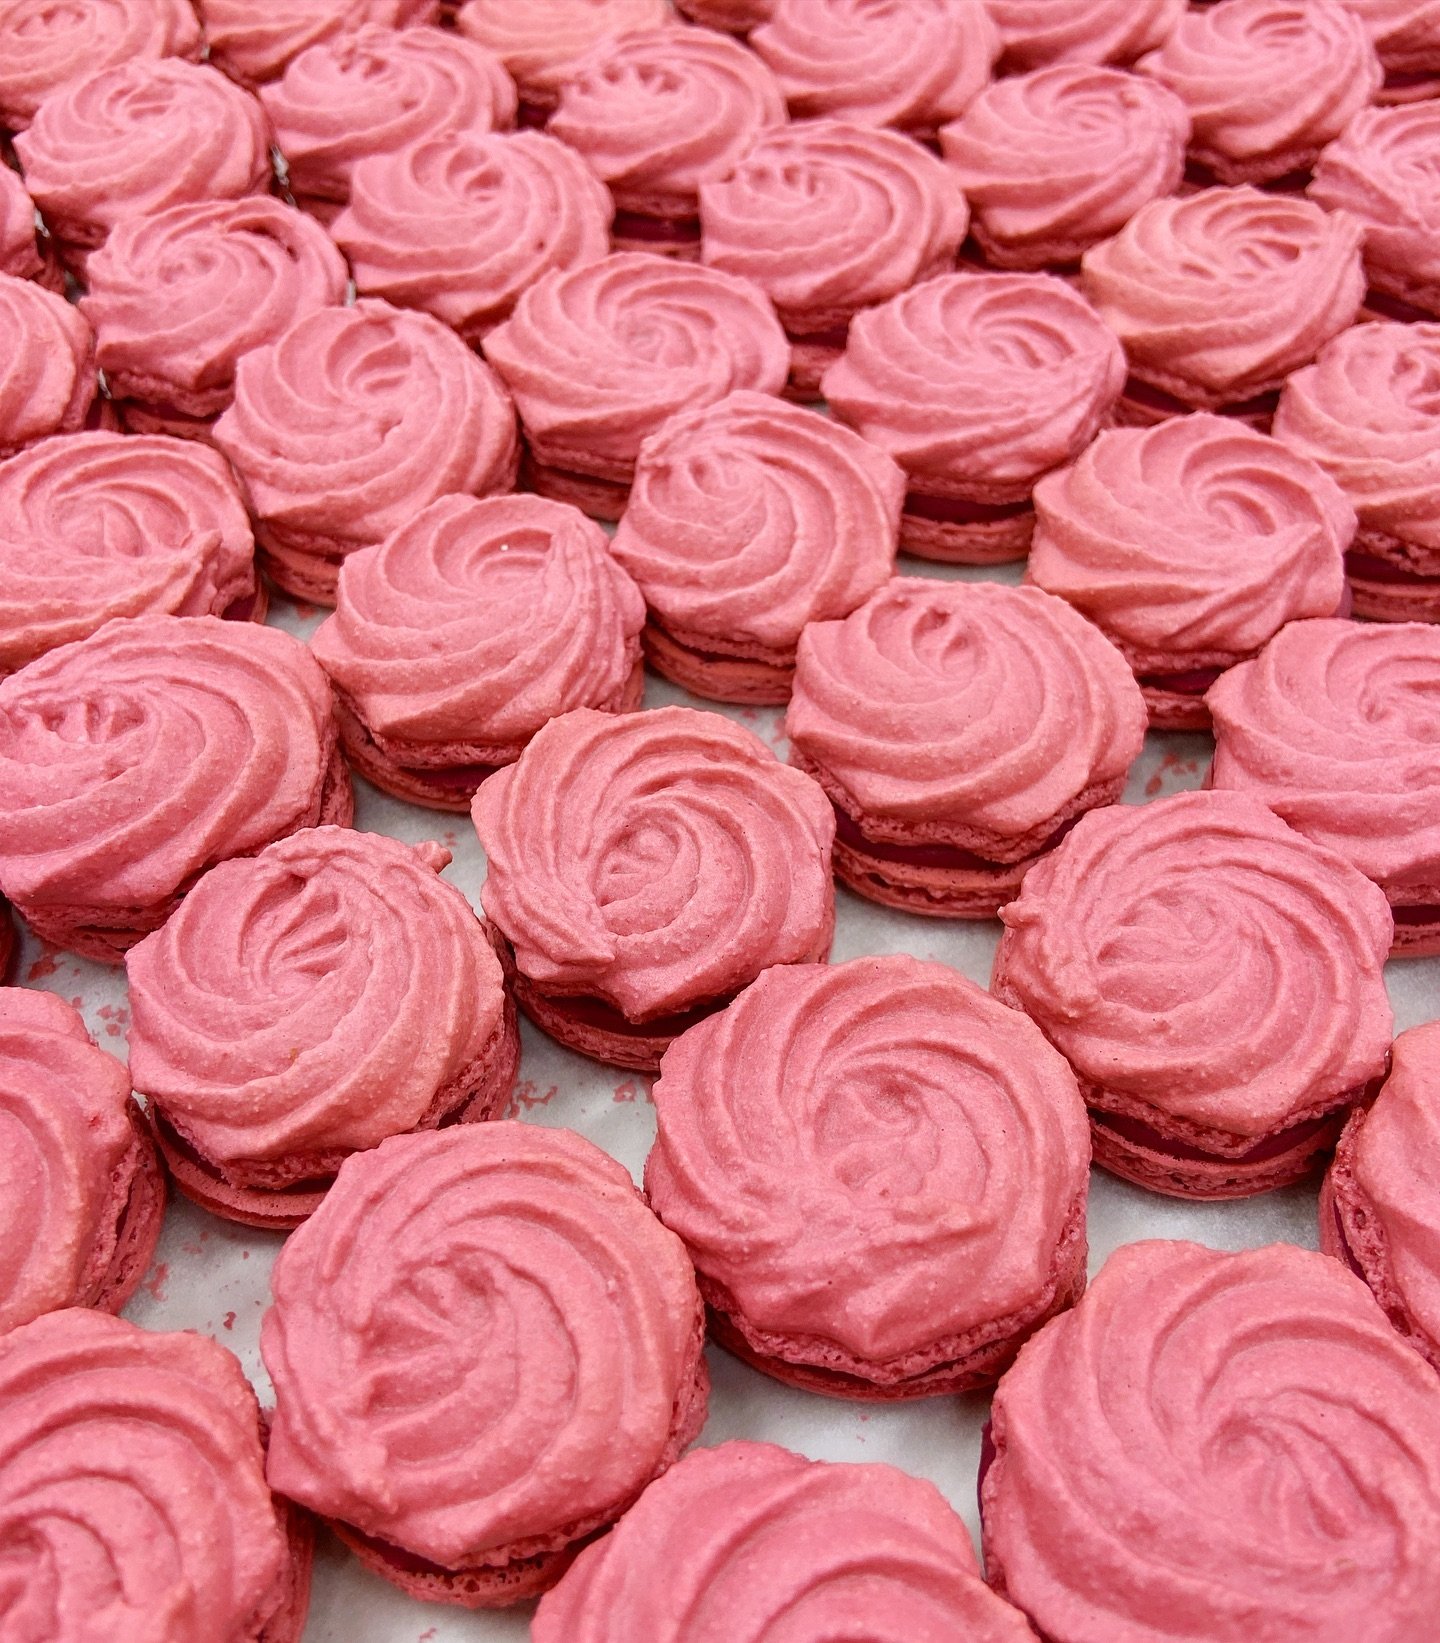 Berry Hibiscus macaron rosettes 🌺 Exclusively included in the Mother&rsquo;s Day Collection Box of 8!

With Mother&rsquo;s Day just around the corner, we encourage placing a pre-order! See the full menu of Mother&rsquo;s Day macarons, mini cakes, me